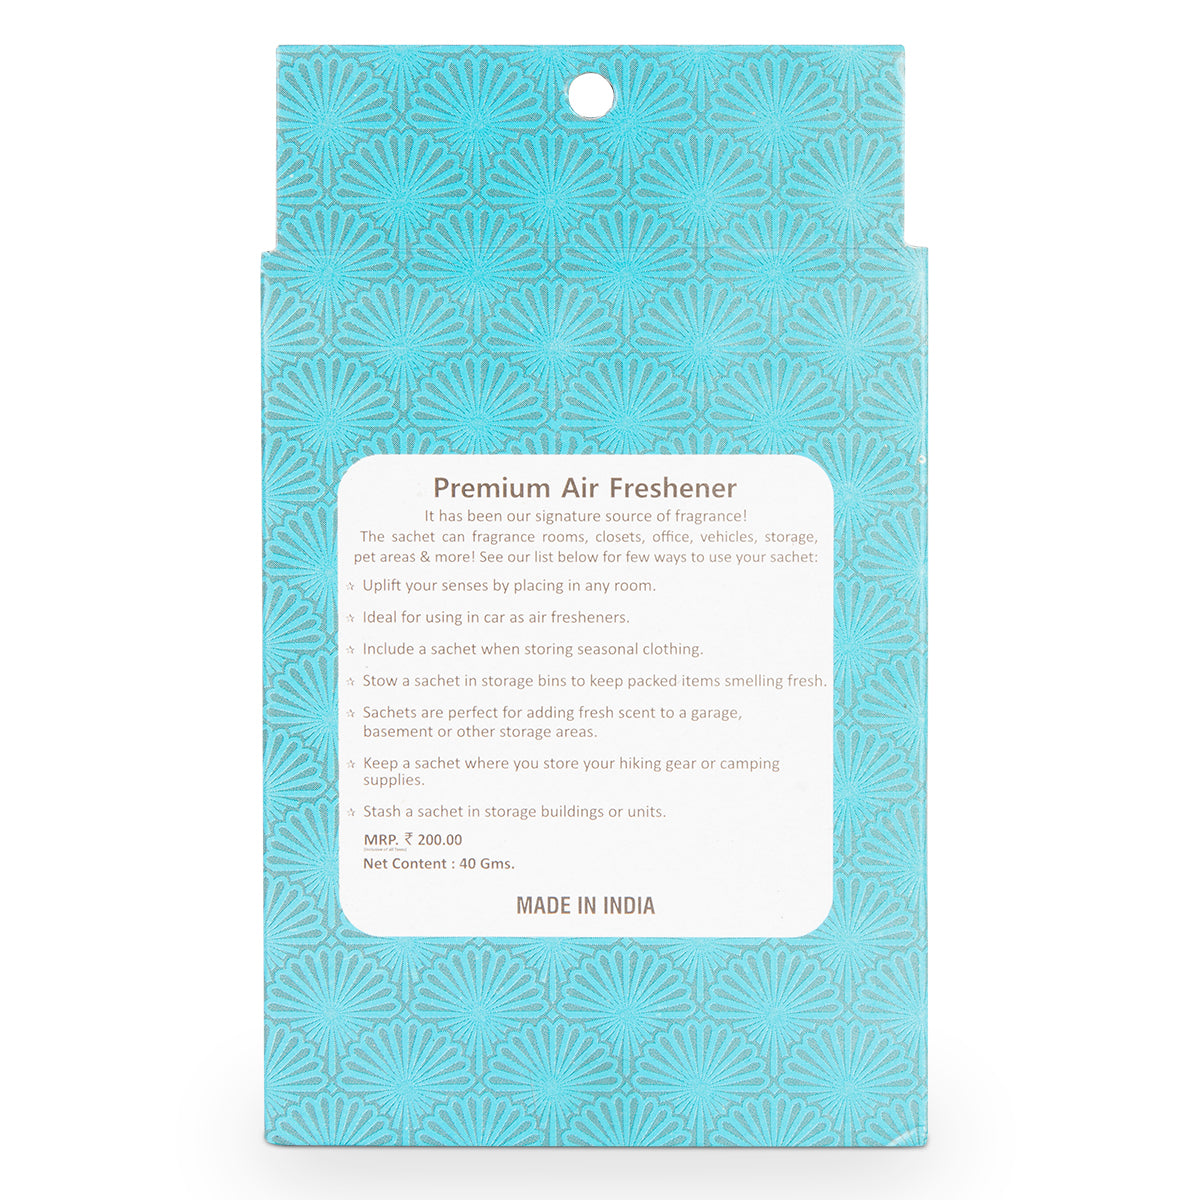 Air Perfume/Air Fresheners Pouch Bag for Office/Room/Car/Toilet and Wardrobe (Pouch Pack 40 gm) (Ocean Breeze)